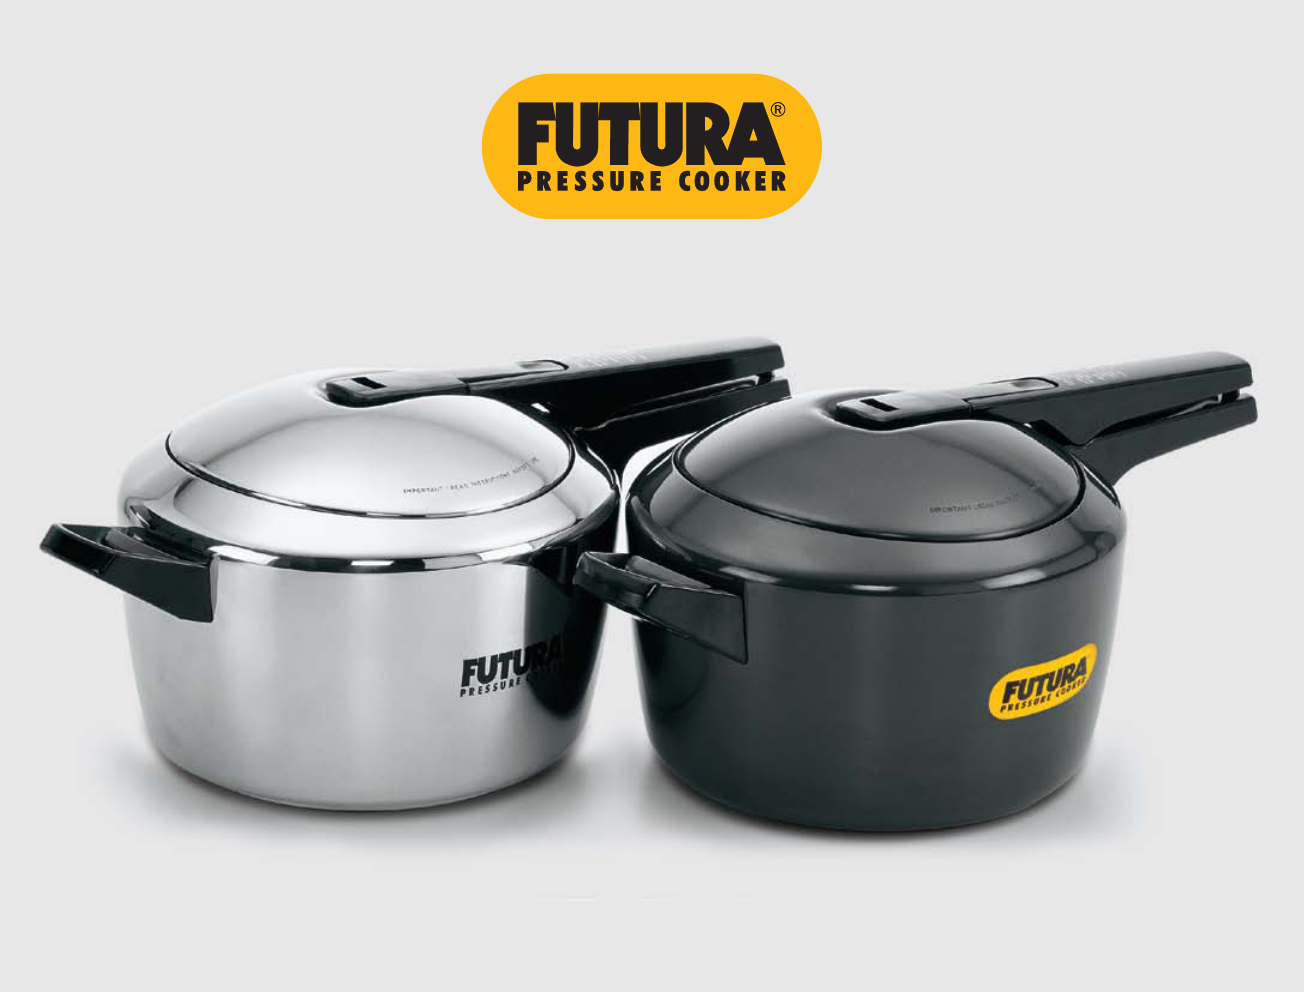 Details about   Hawkins Futura Pressure Cooker 3 Liter For 3-5 Person Works on Induction Gas 